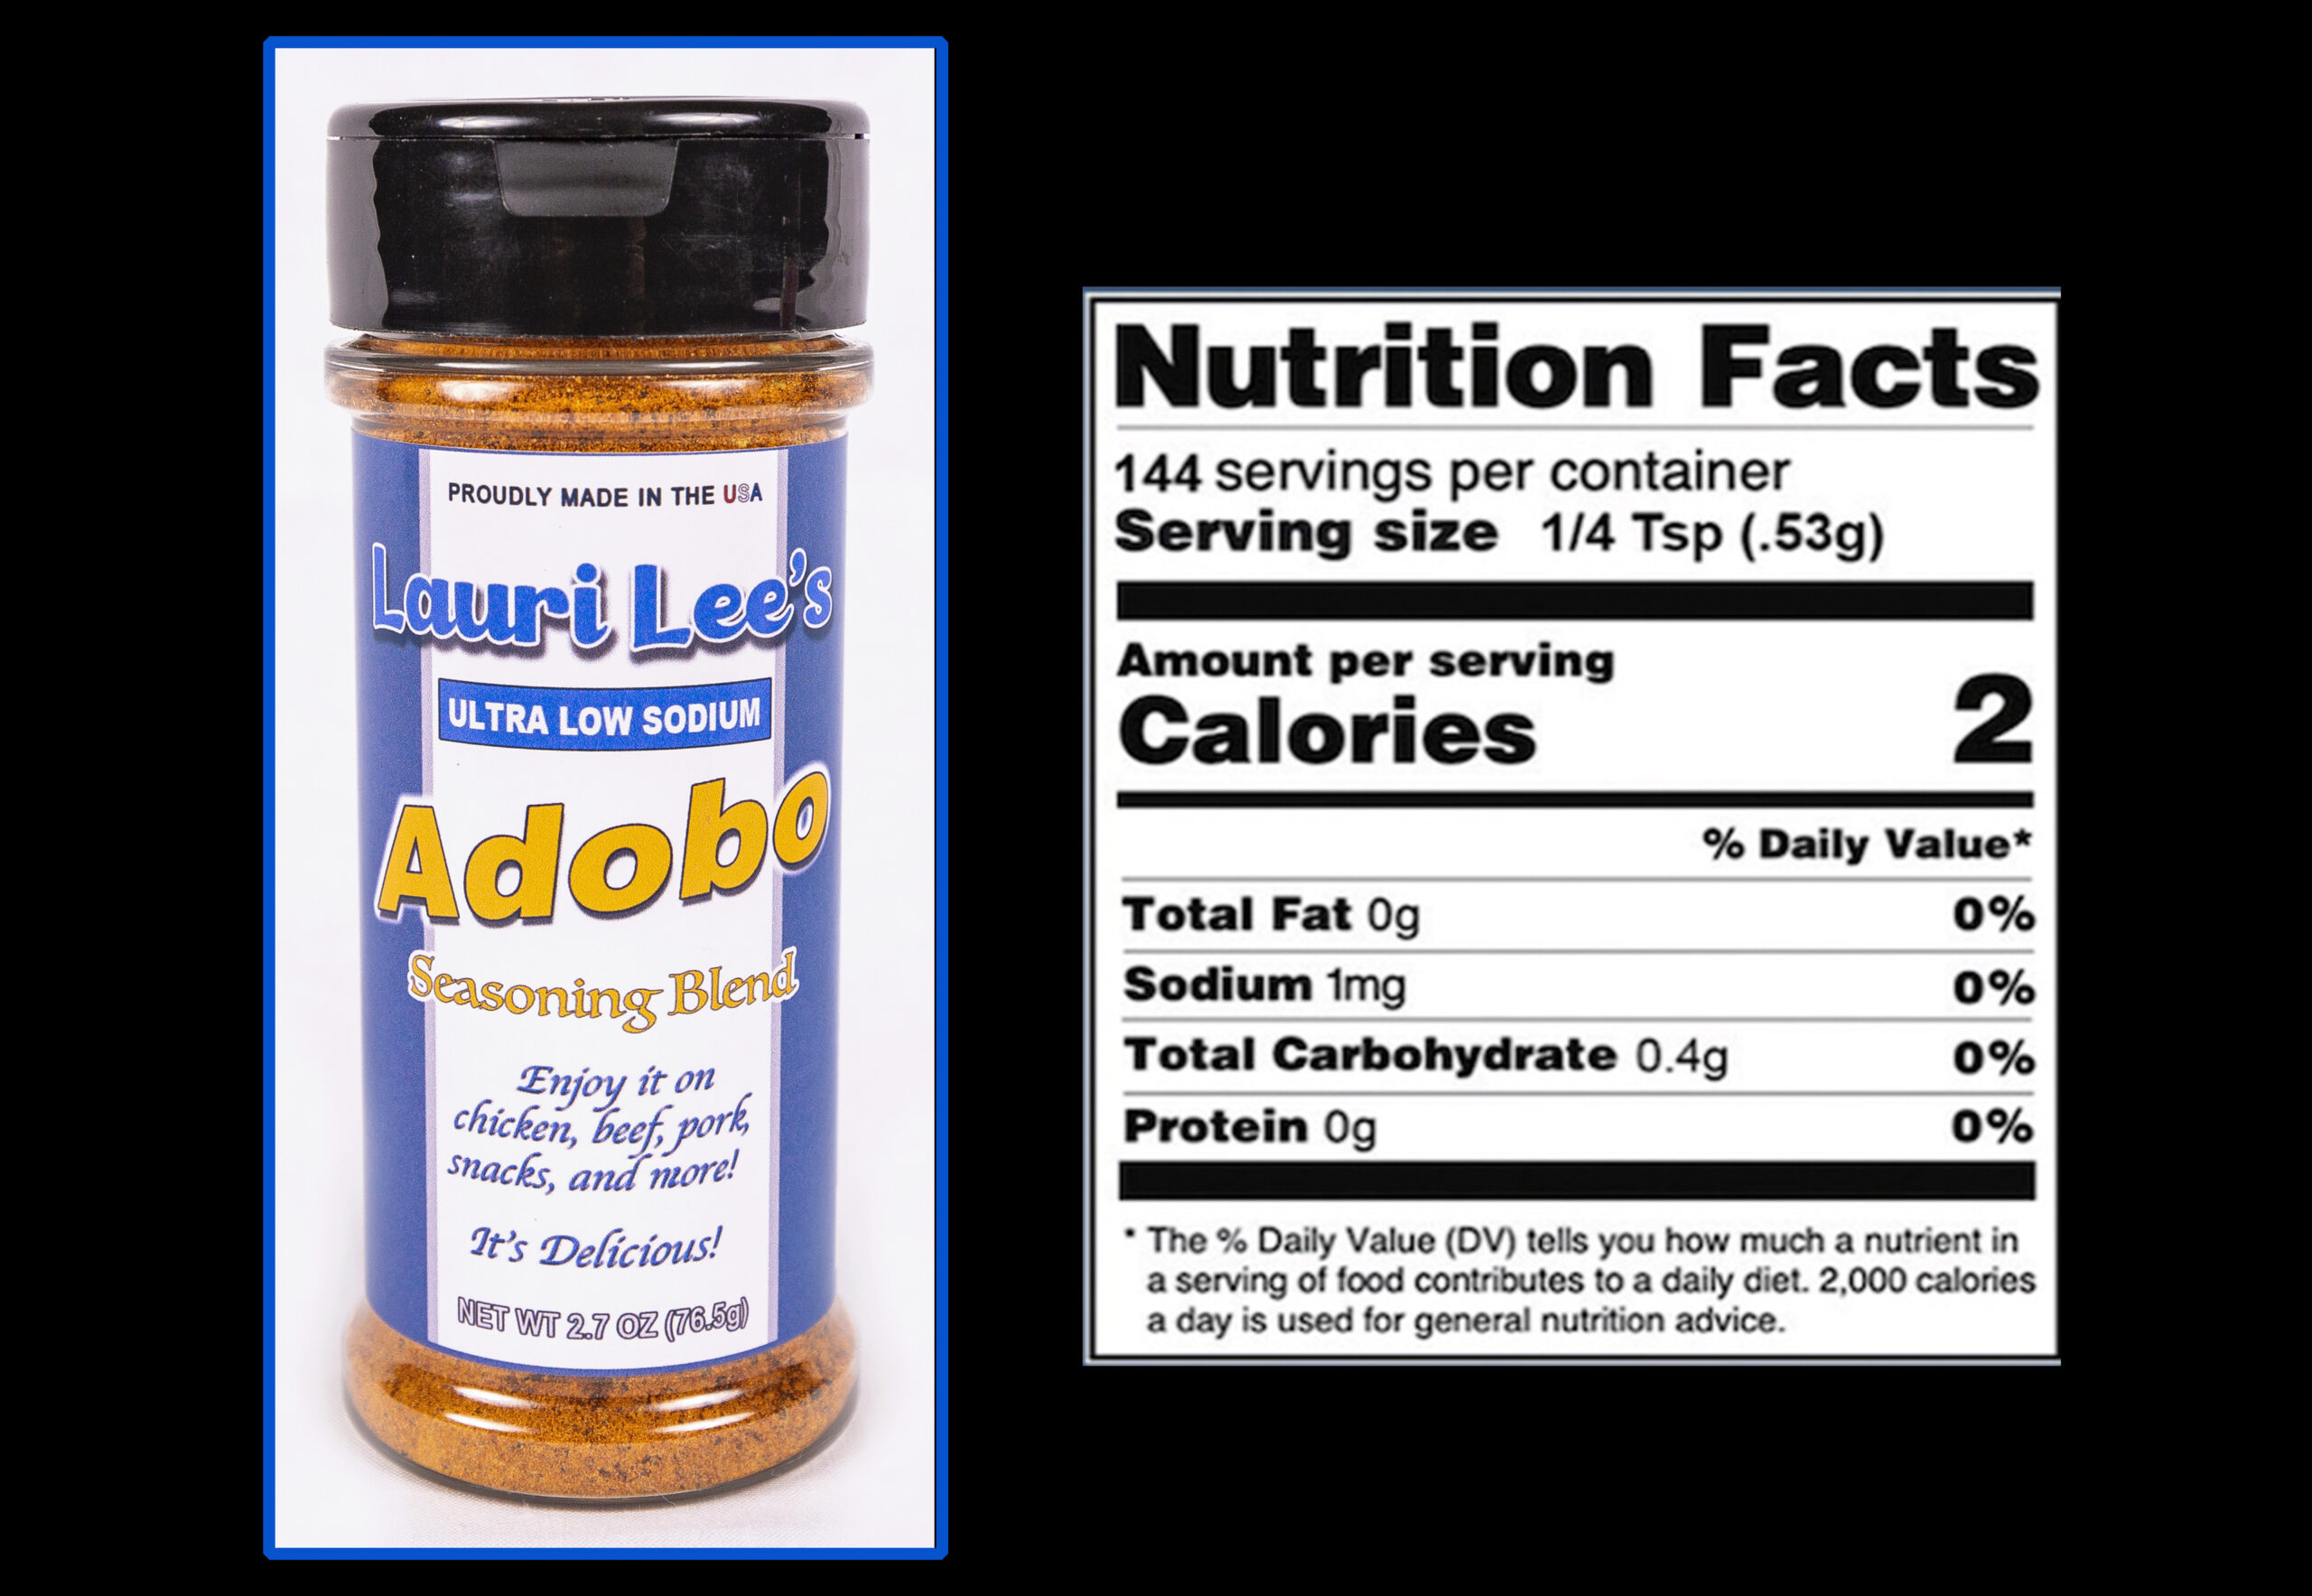 https://laurilees.com/wp-content/uploads/2022/10/Product-Info-Adobo-scaled.jpg